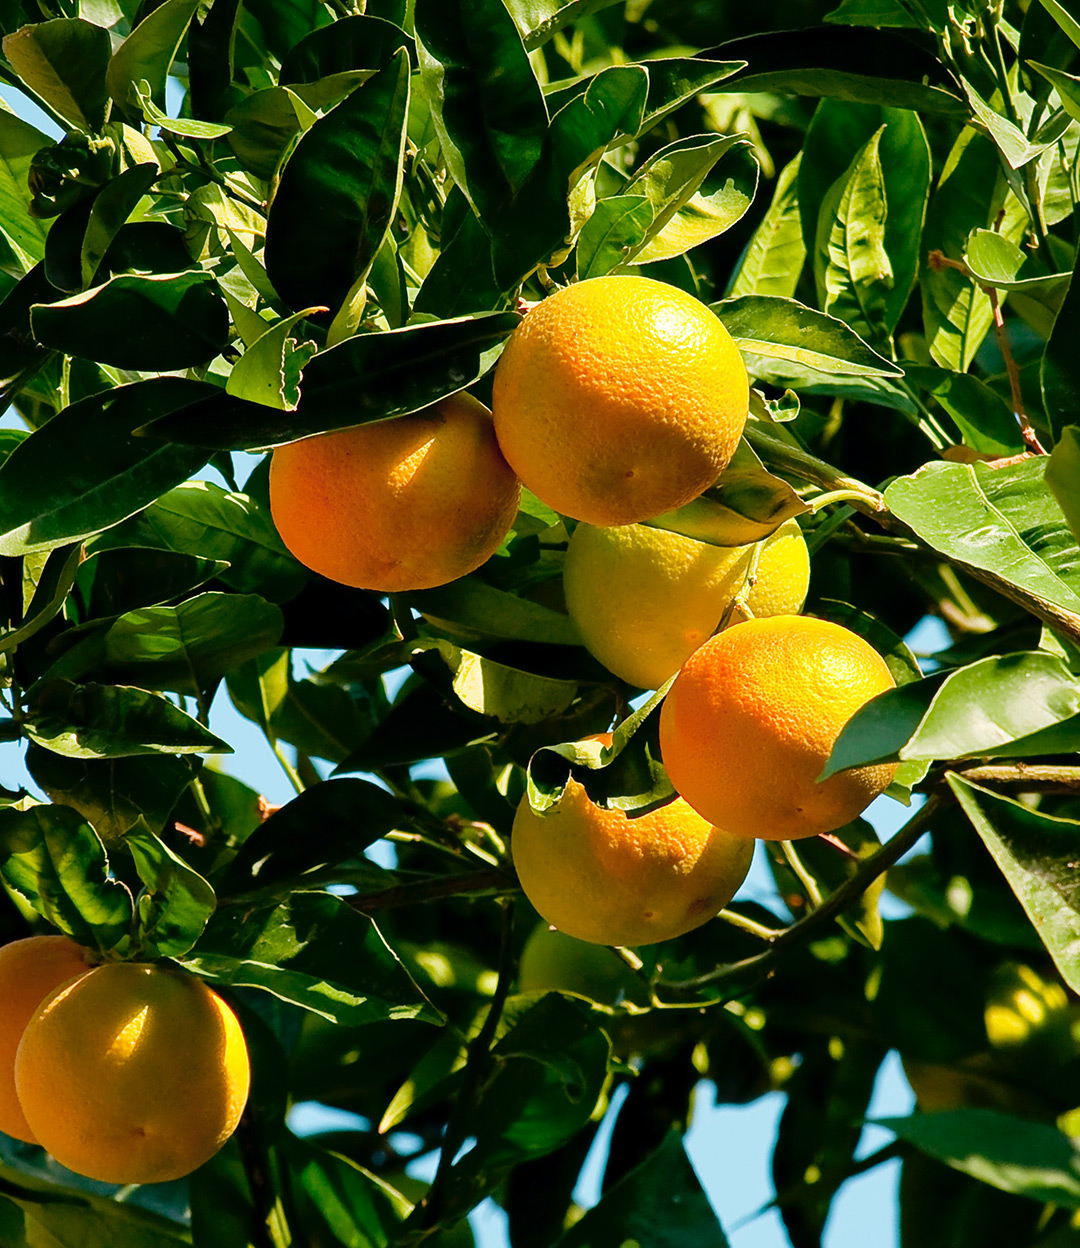 Image of oranges growing on a tree